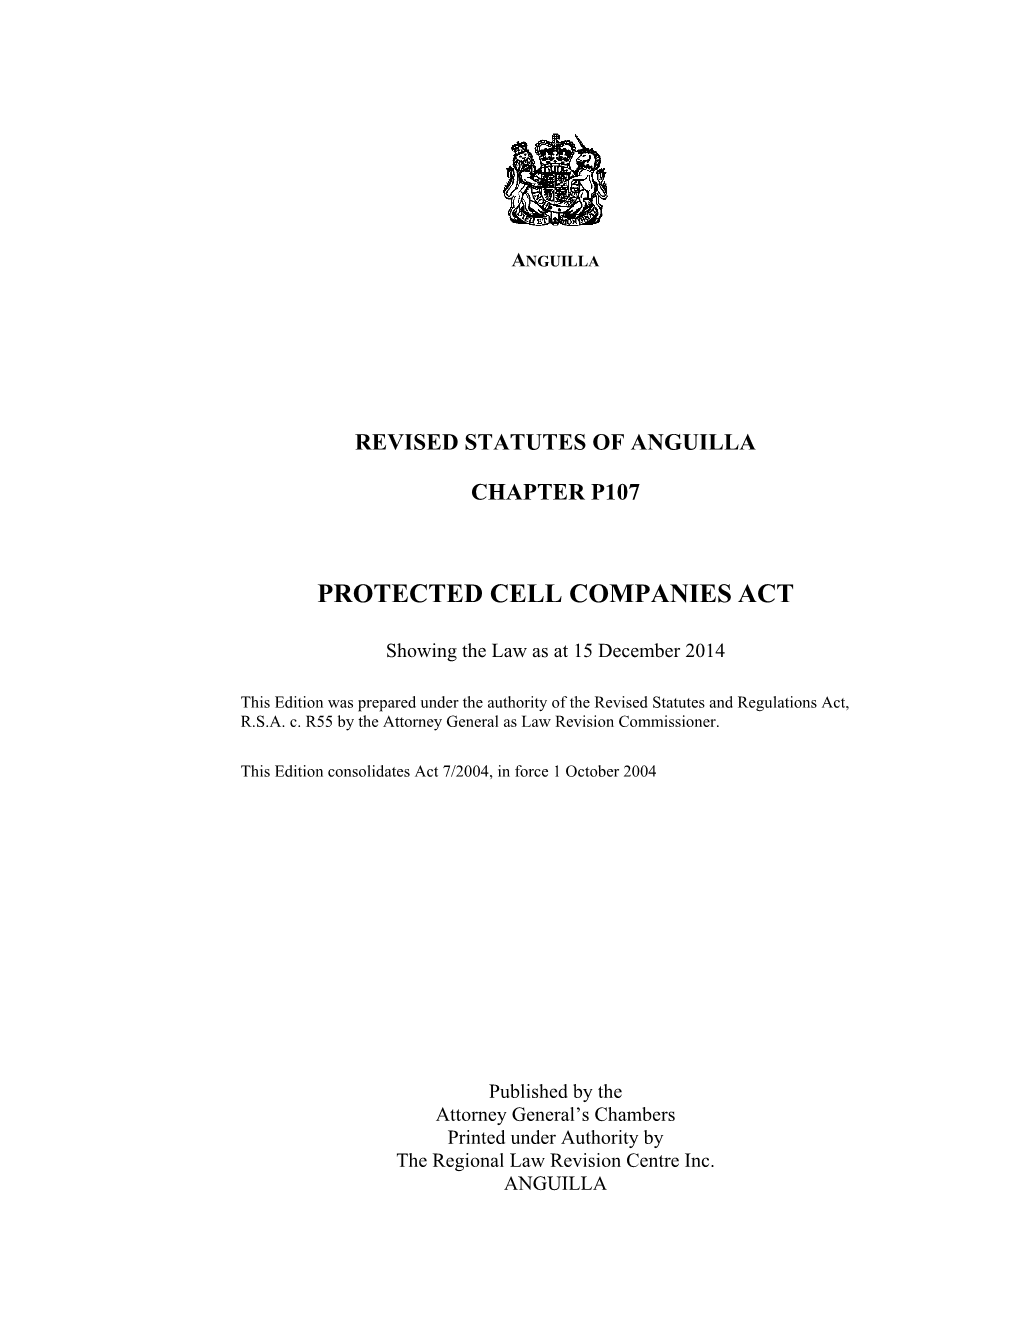 Protected Cell Companies Act